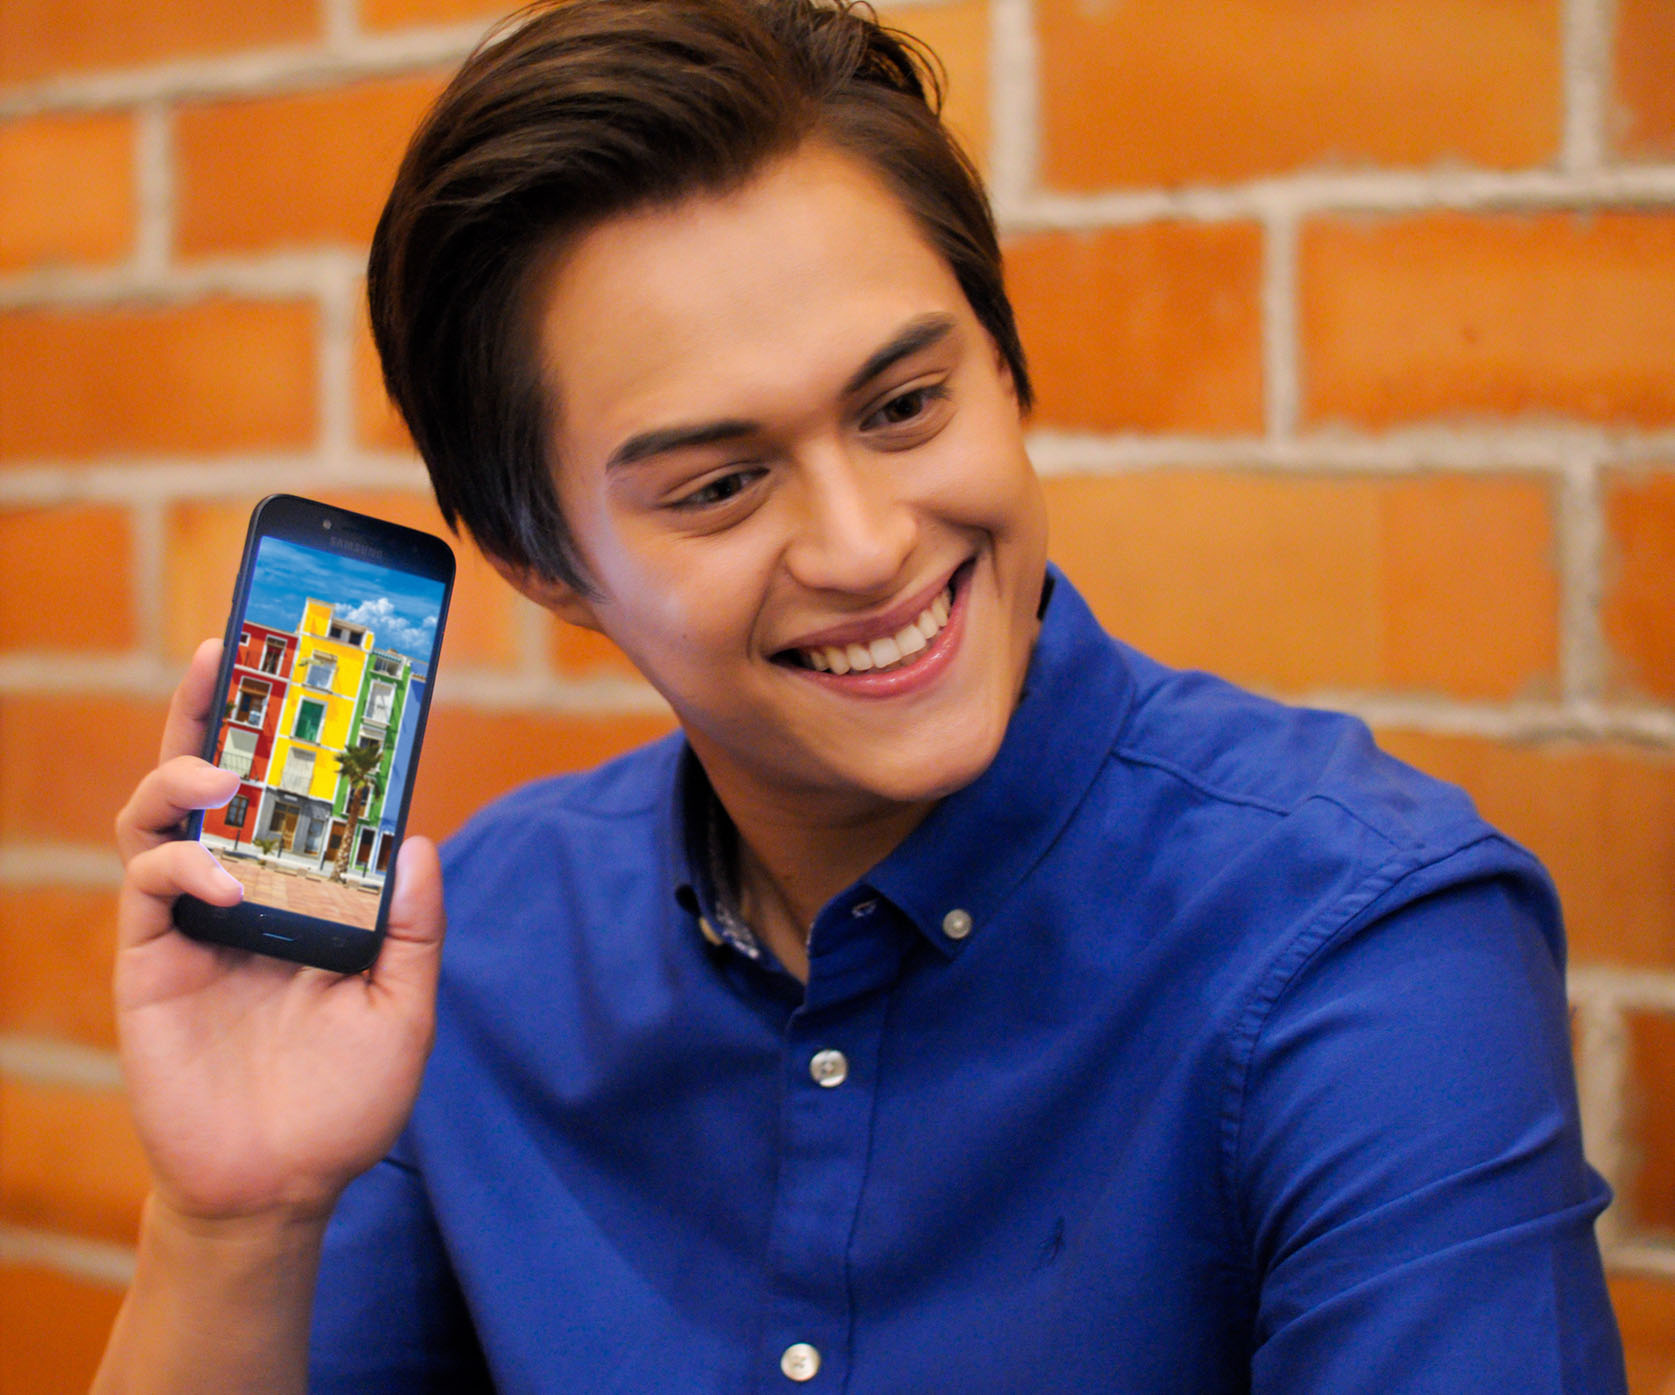 Enrique Gil talks about the people, places, and things that add color to his life